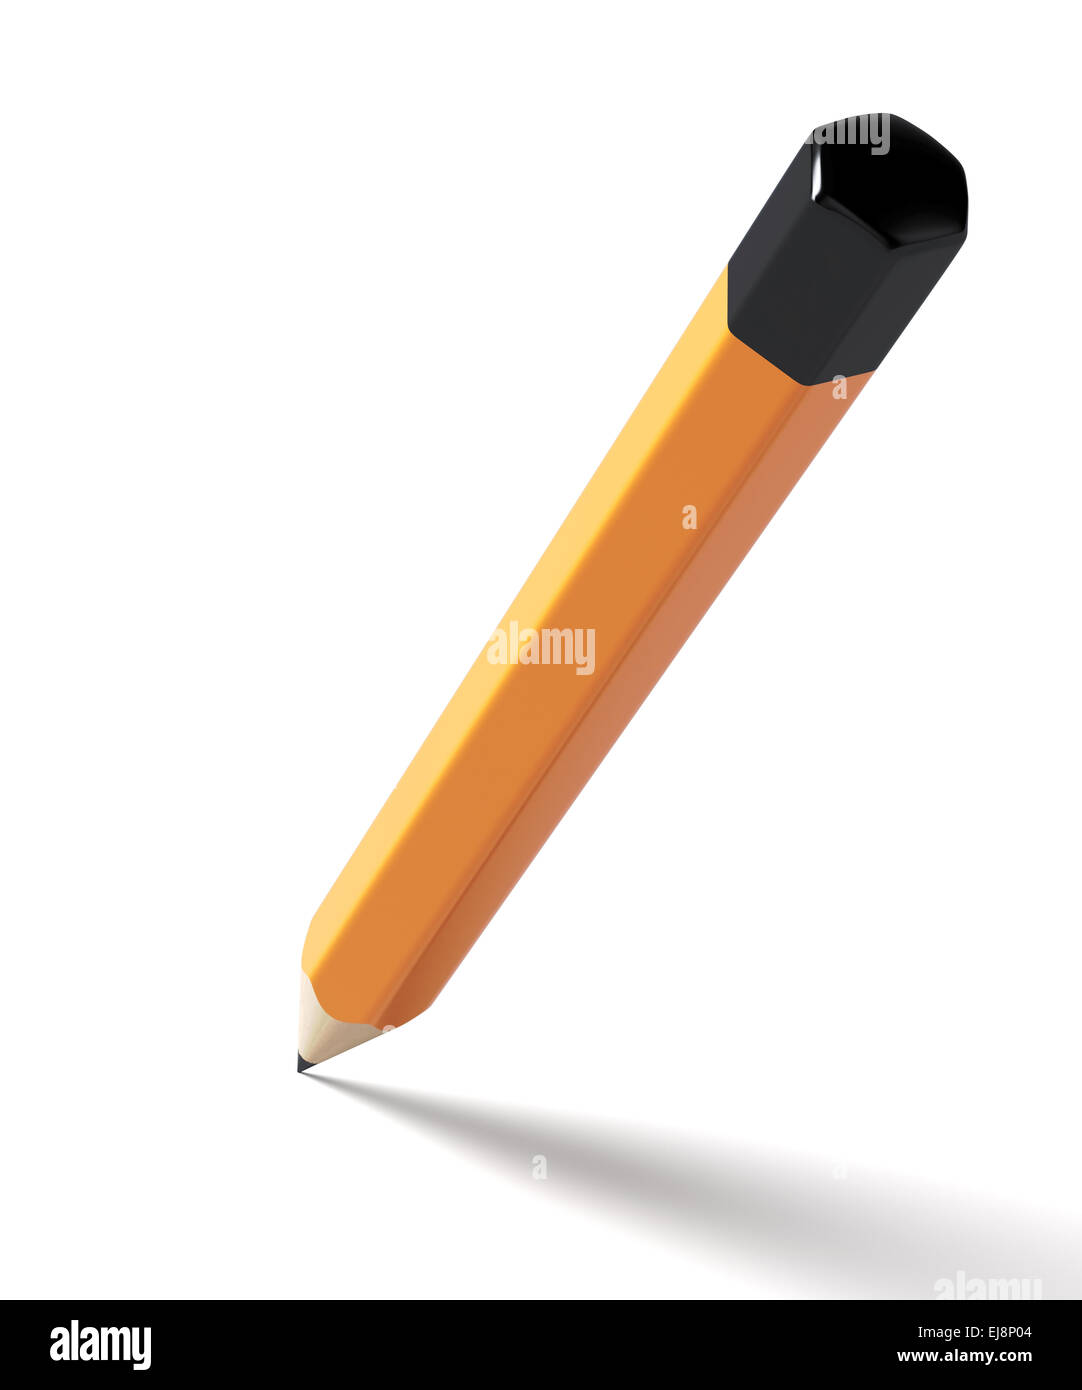 3d rendering of pencil isolated on white background. Edocation and drawing concept Stock Photo